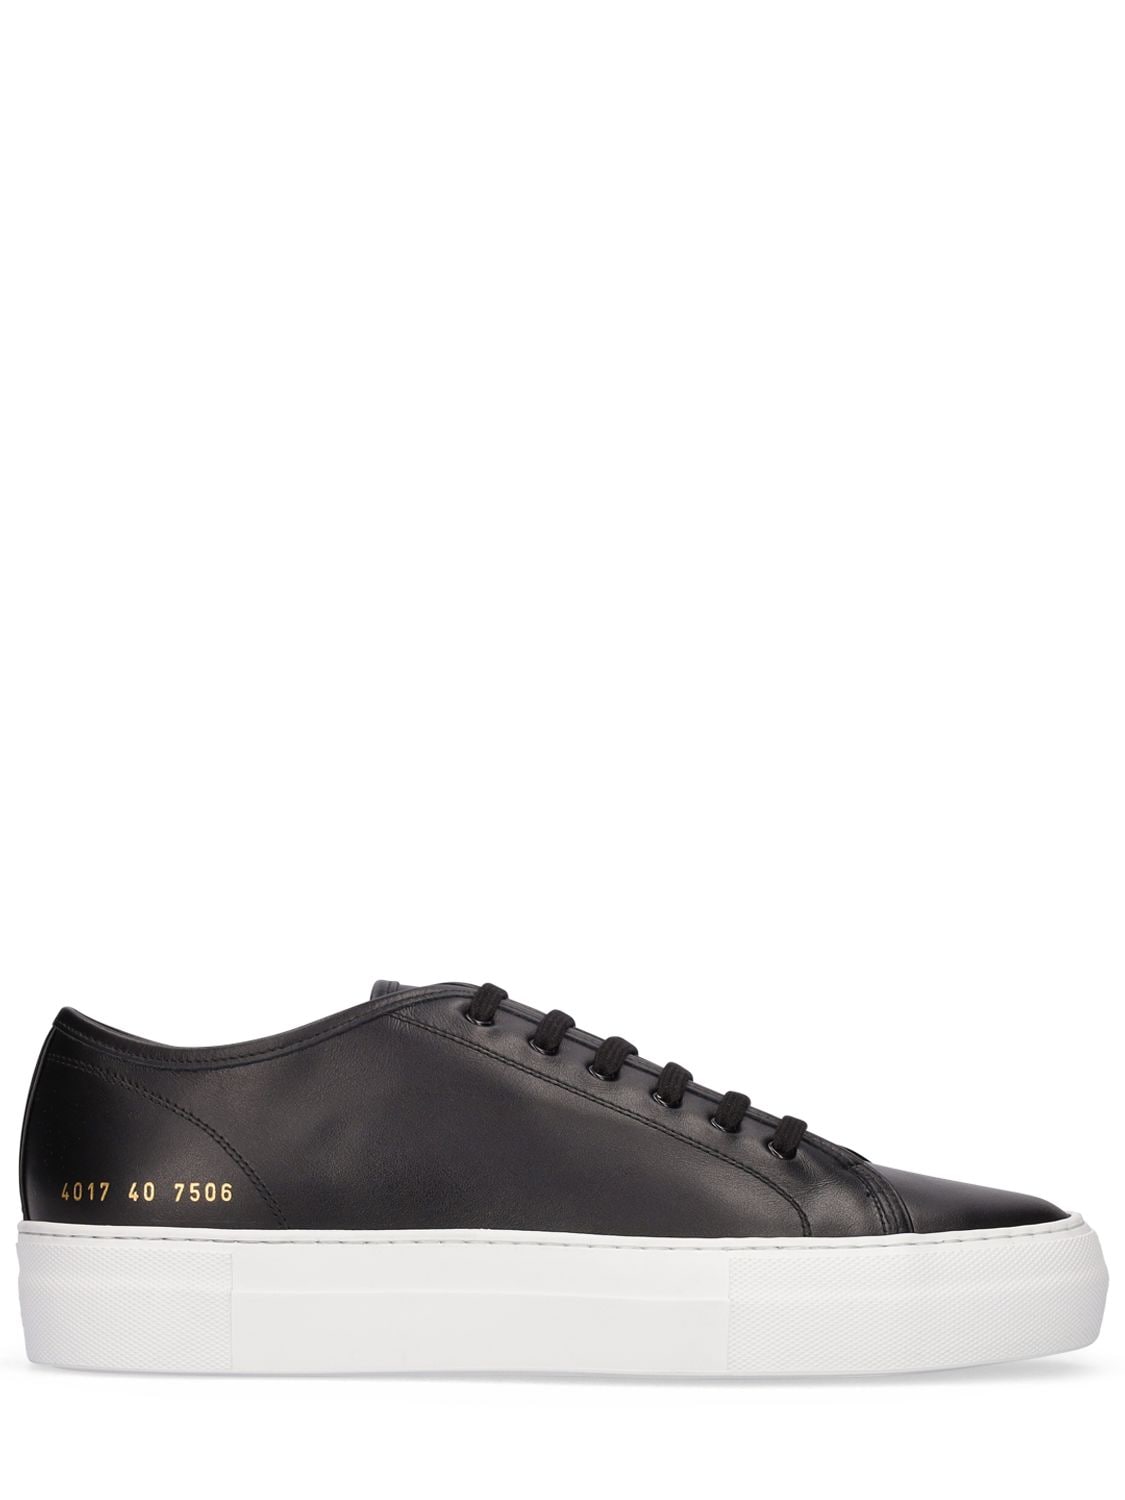 COMMON PROJECTS TOURNAMENT SUPER LOW LEATHER trainers